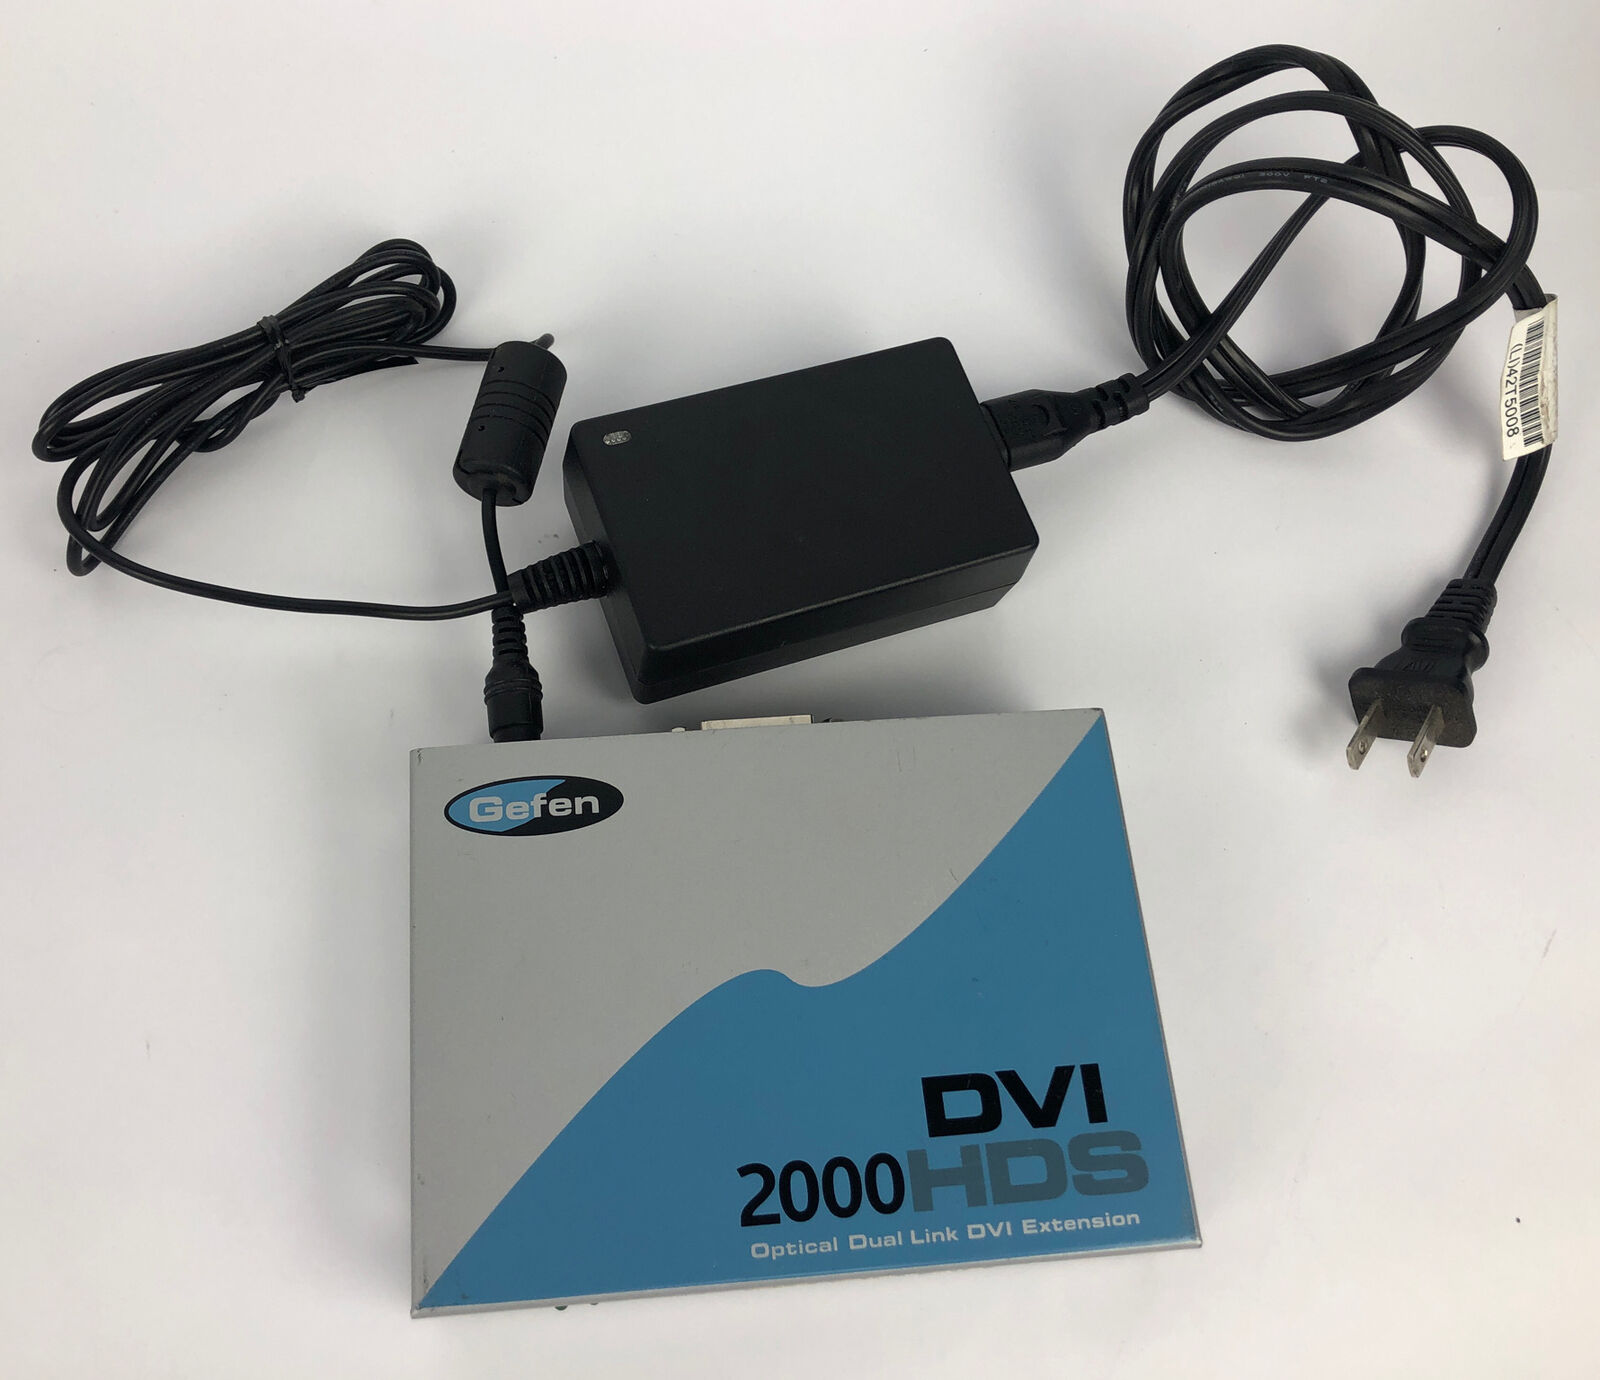 GEFEN 2000 HDS OPTICAL DVI EXTENSION SENDER with Power Supply - Fast Shipping